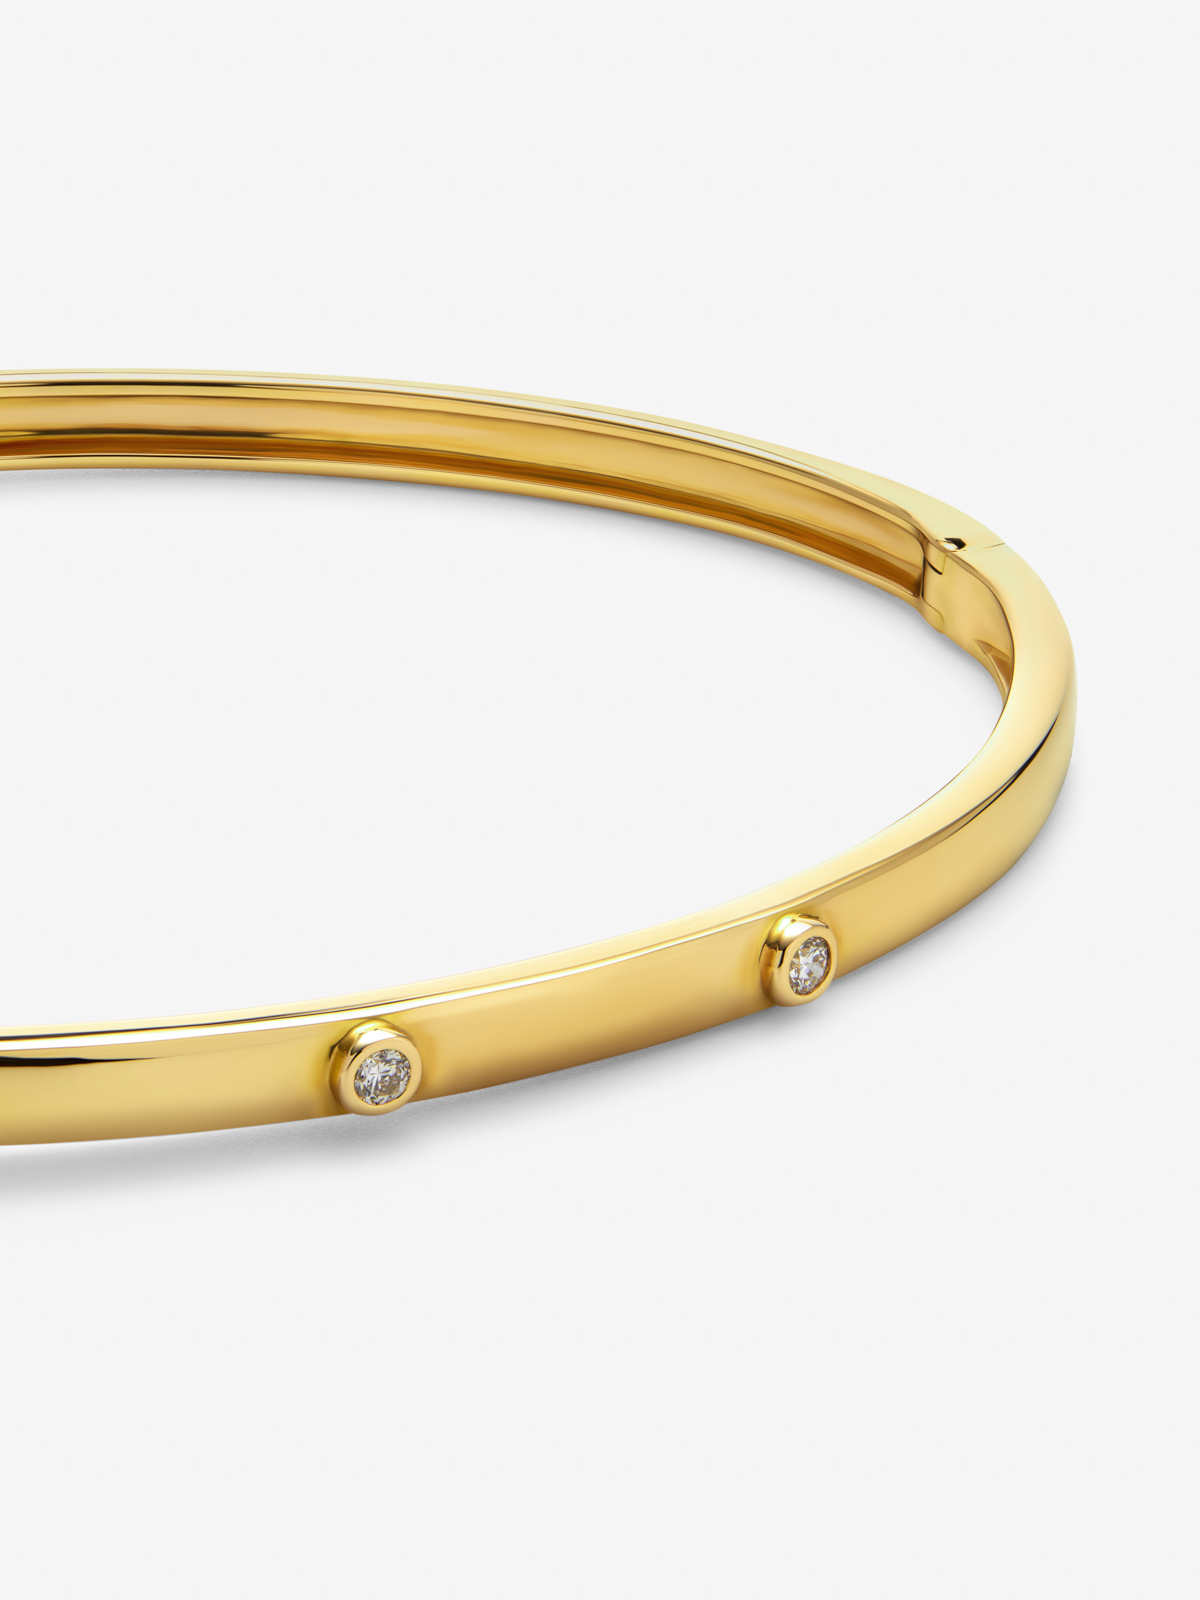 Rigid 18K yellow gold bracelet with 3 brilliant-cut diamonds with a total of 0.07 cts